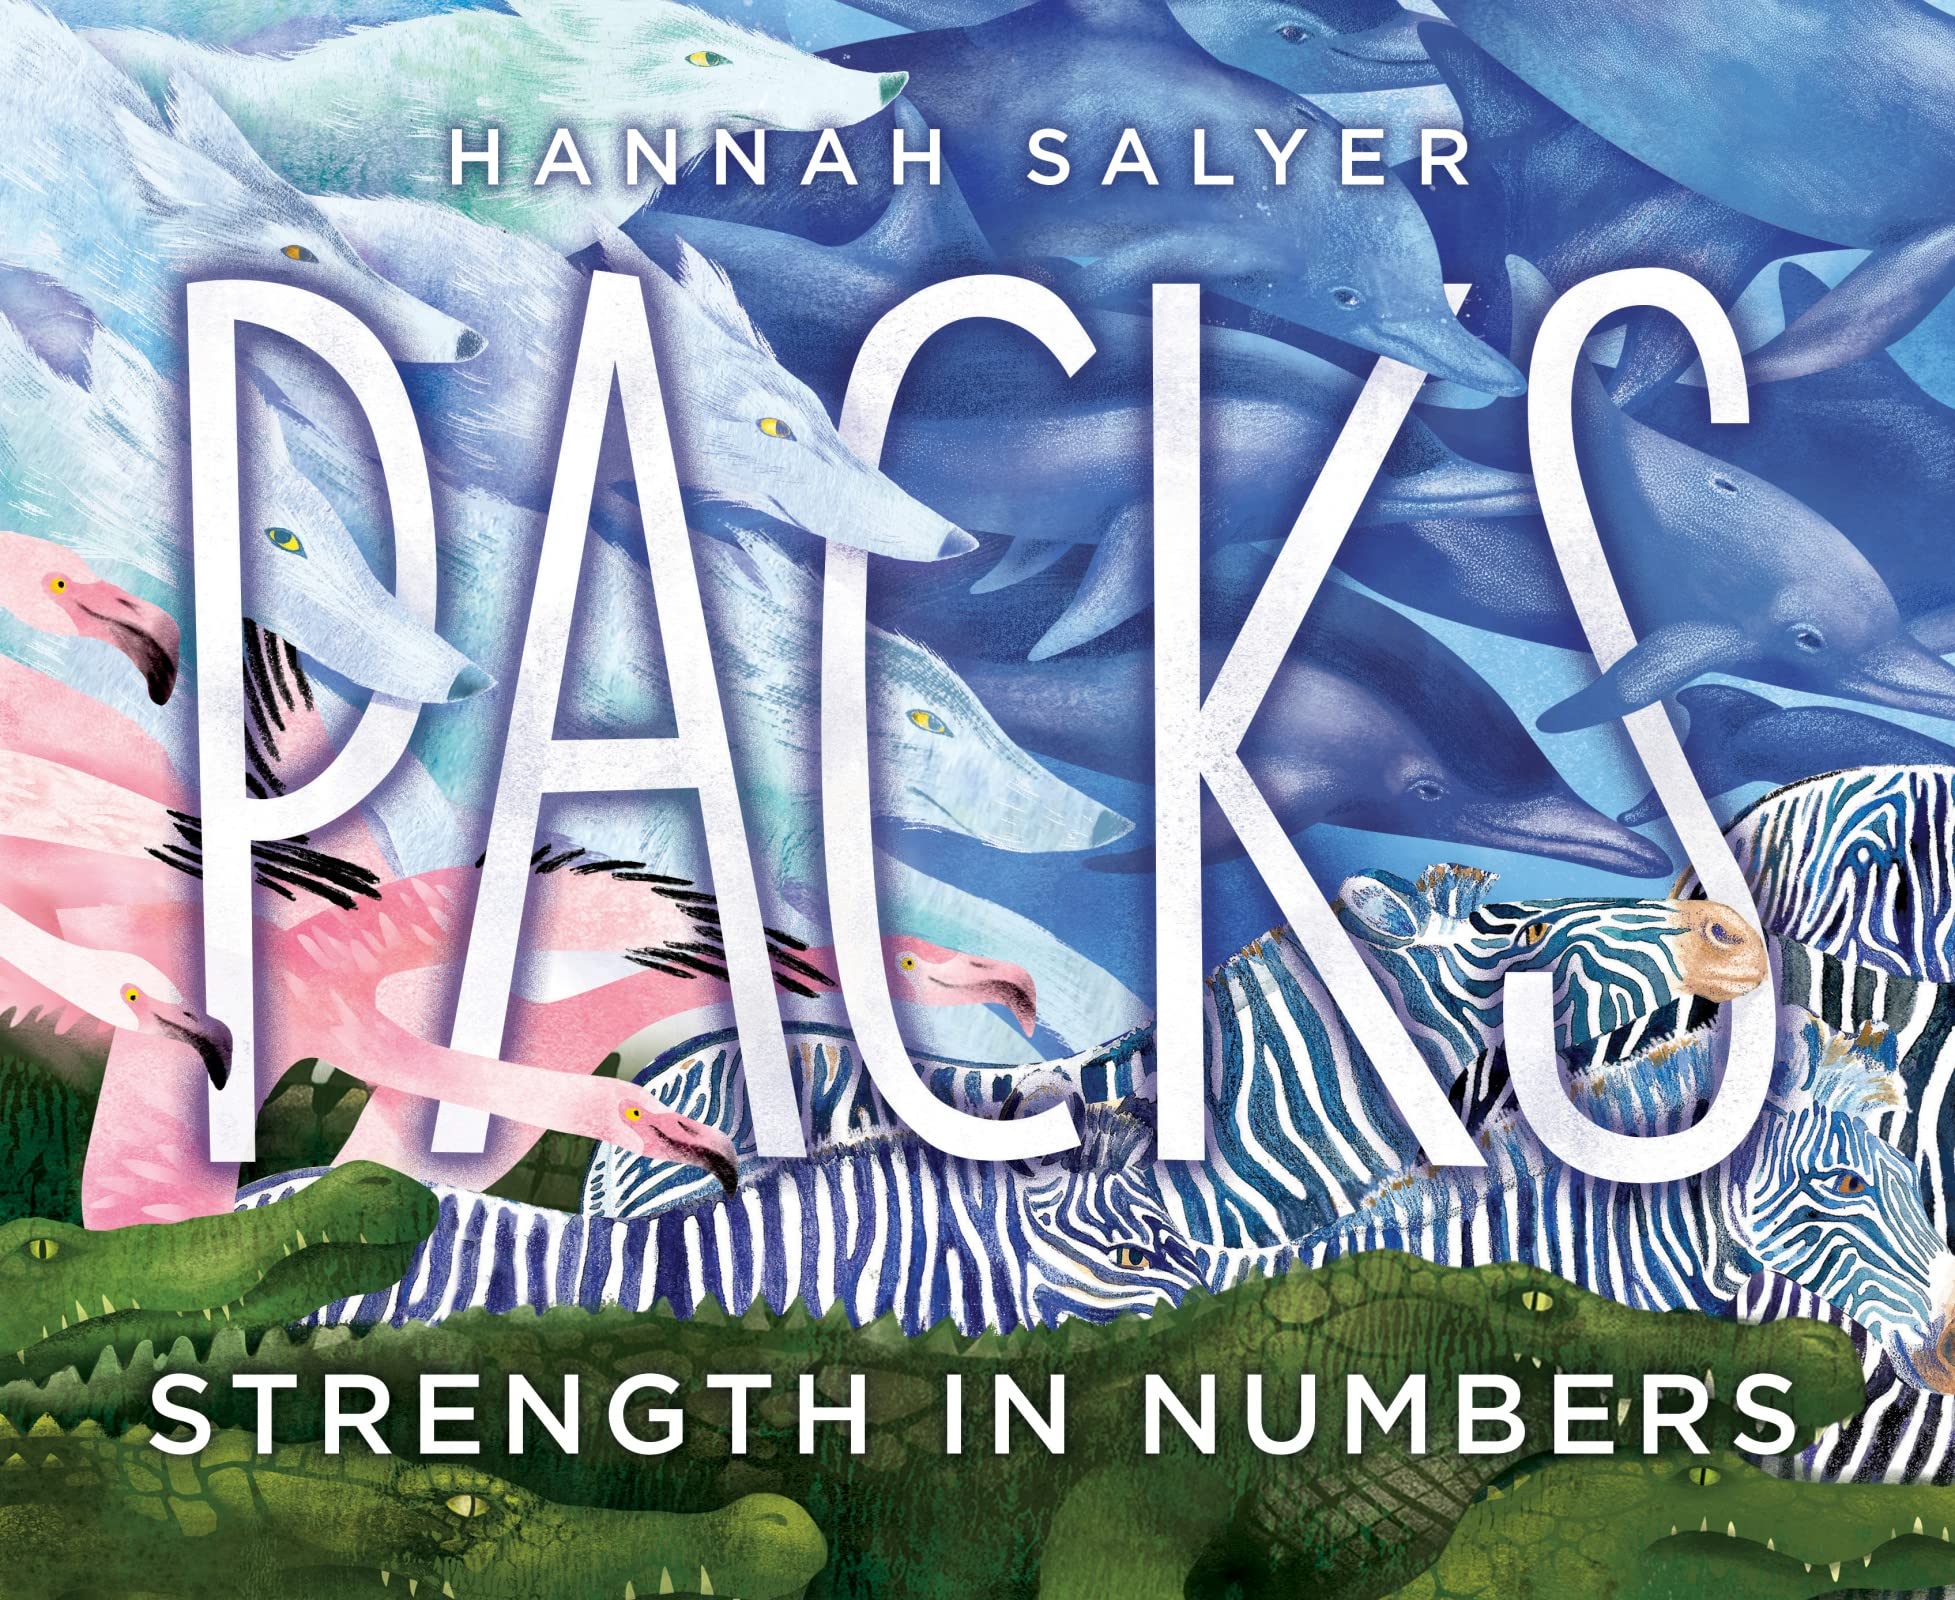 Packs: Strength in Numbers, by Hannah Salyer